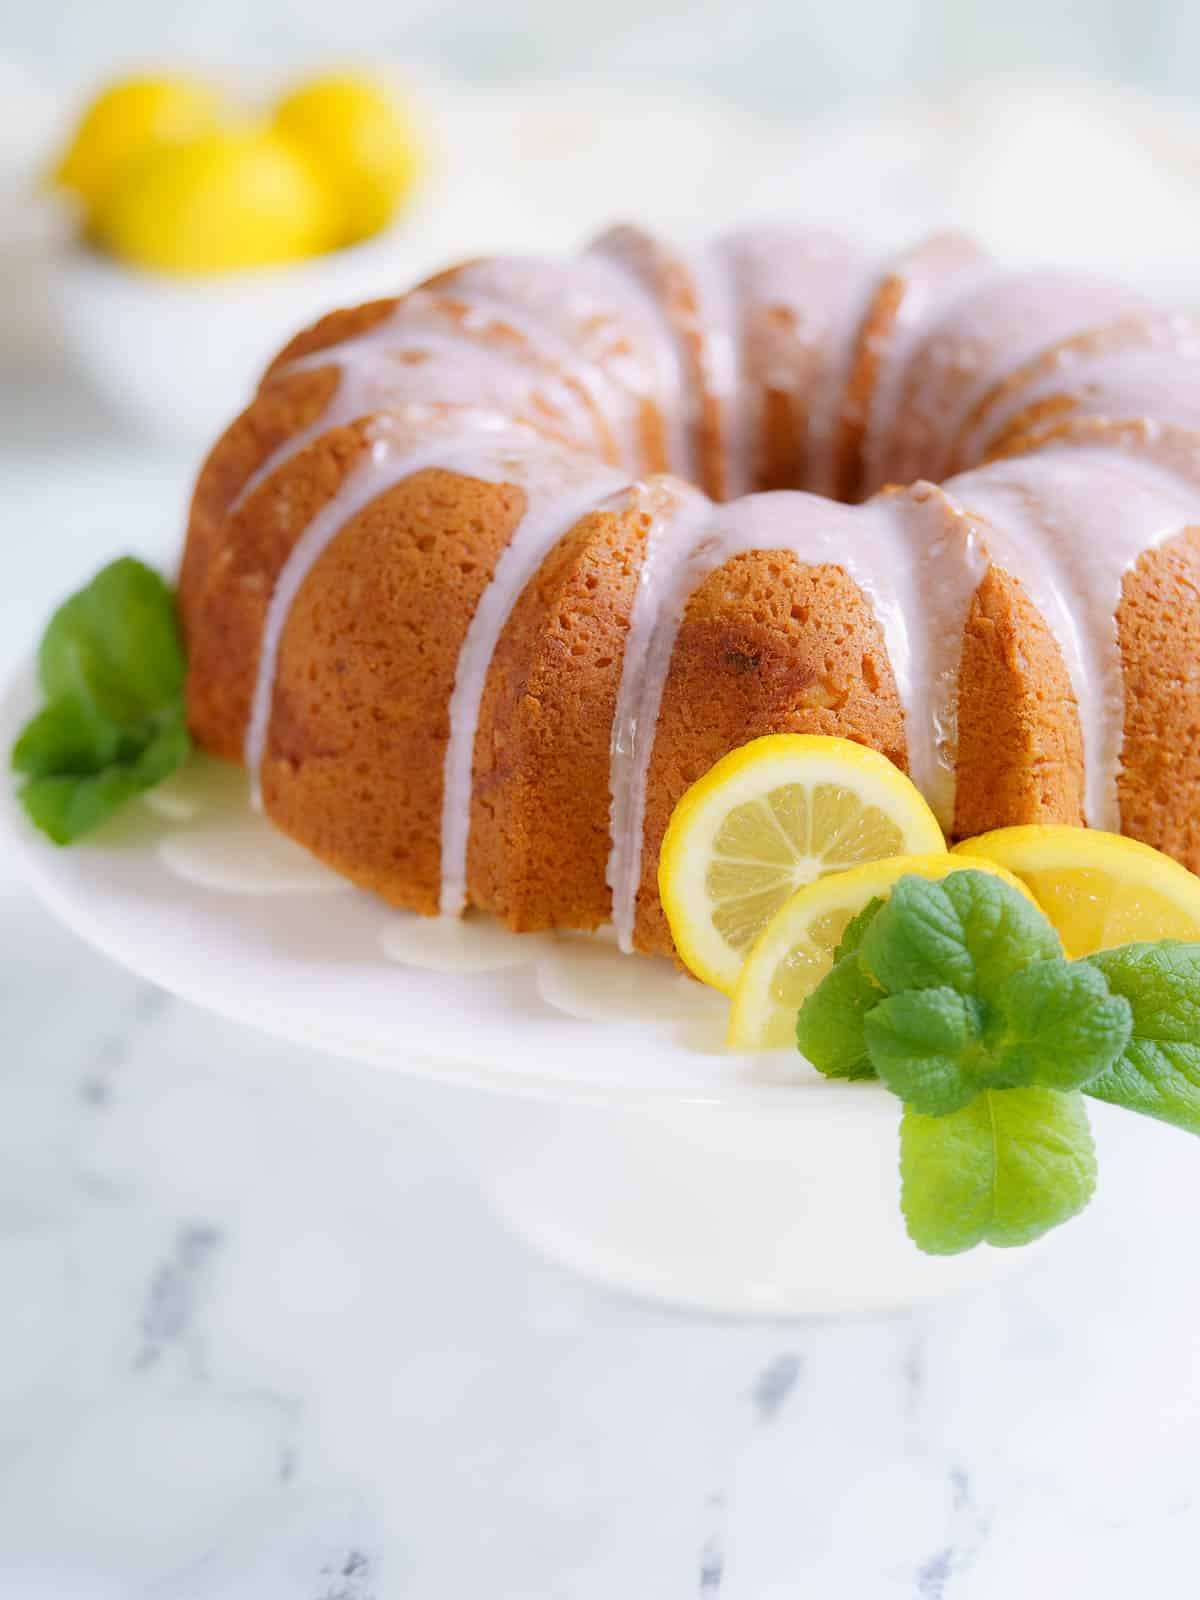 lemon drizzle cake on white stand with lemon wedges and mint